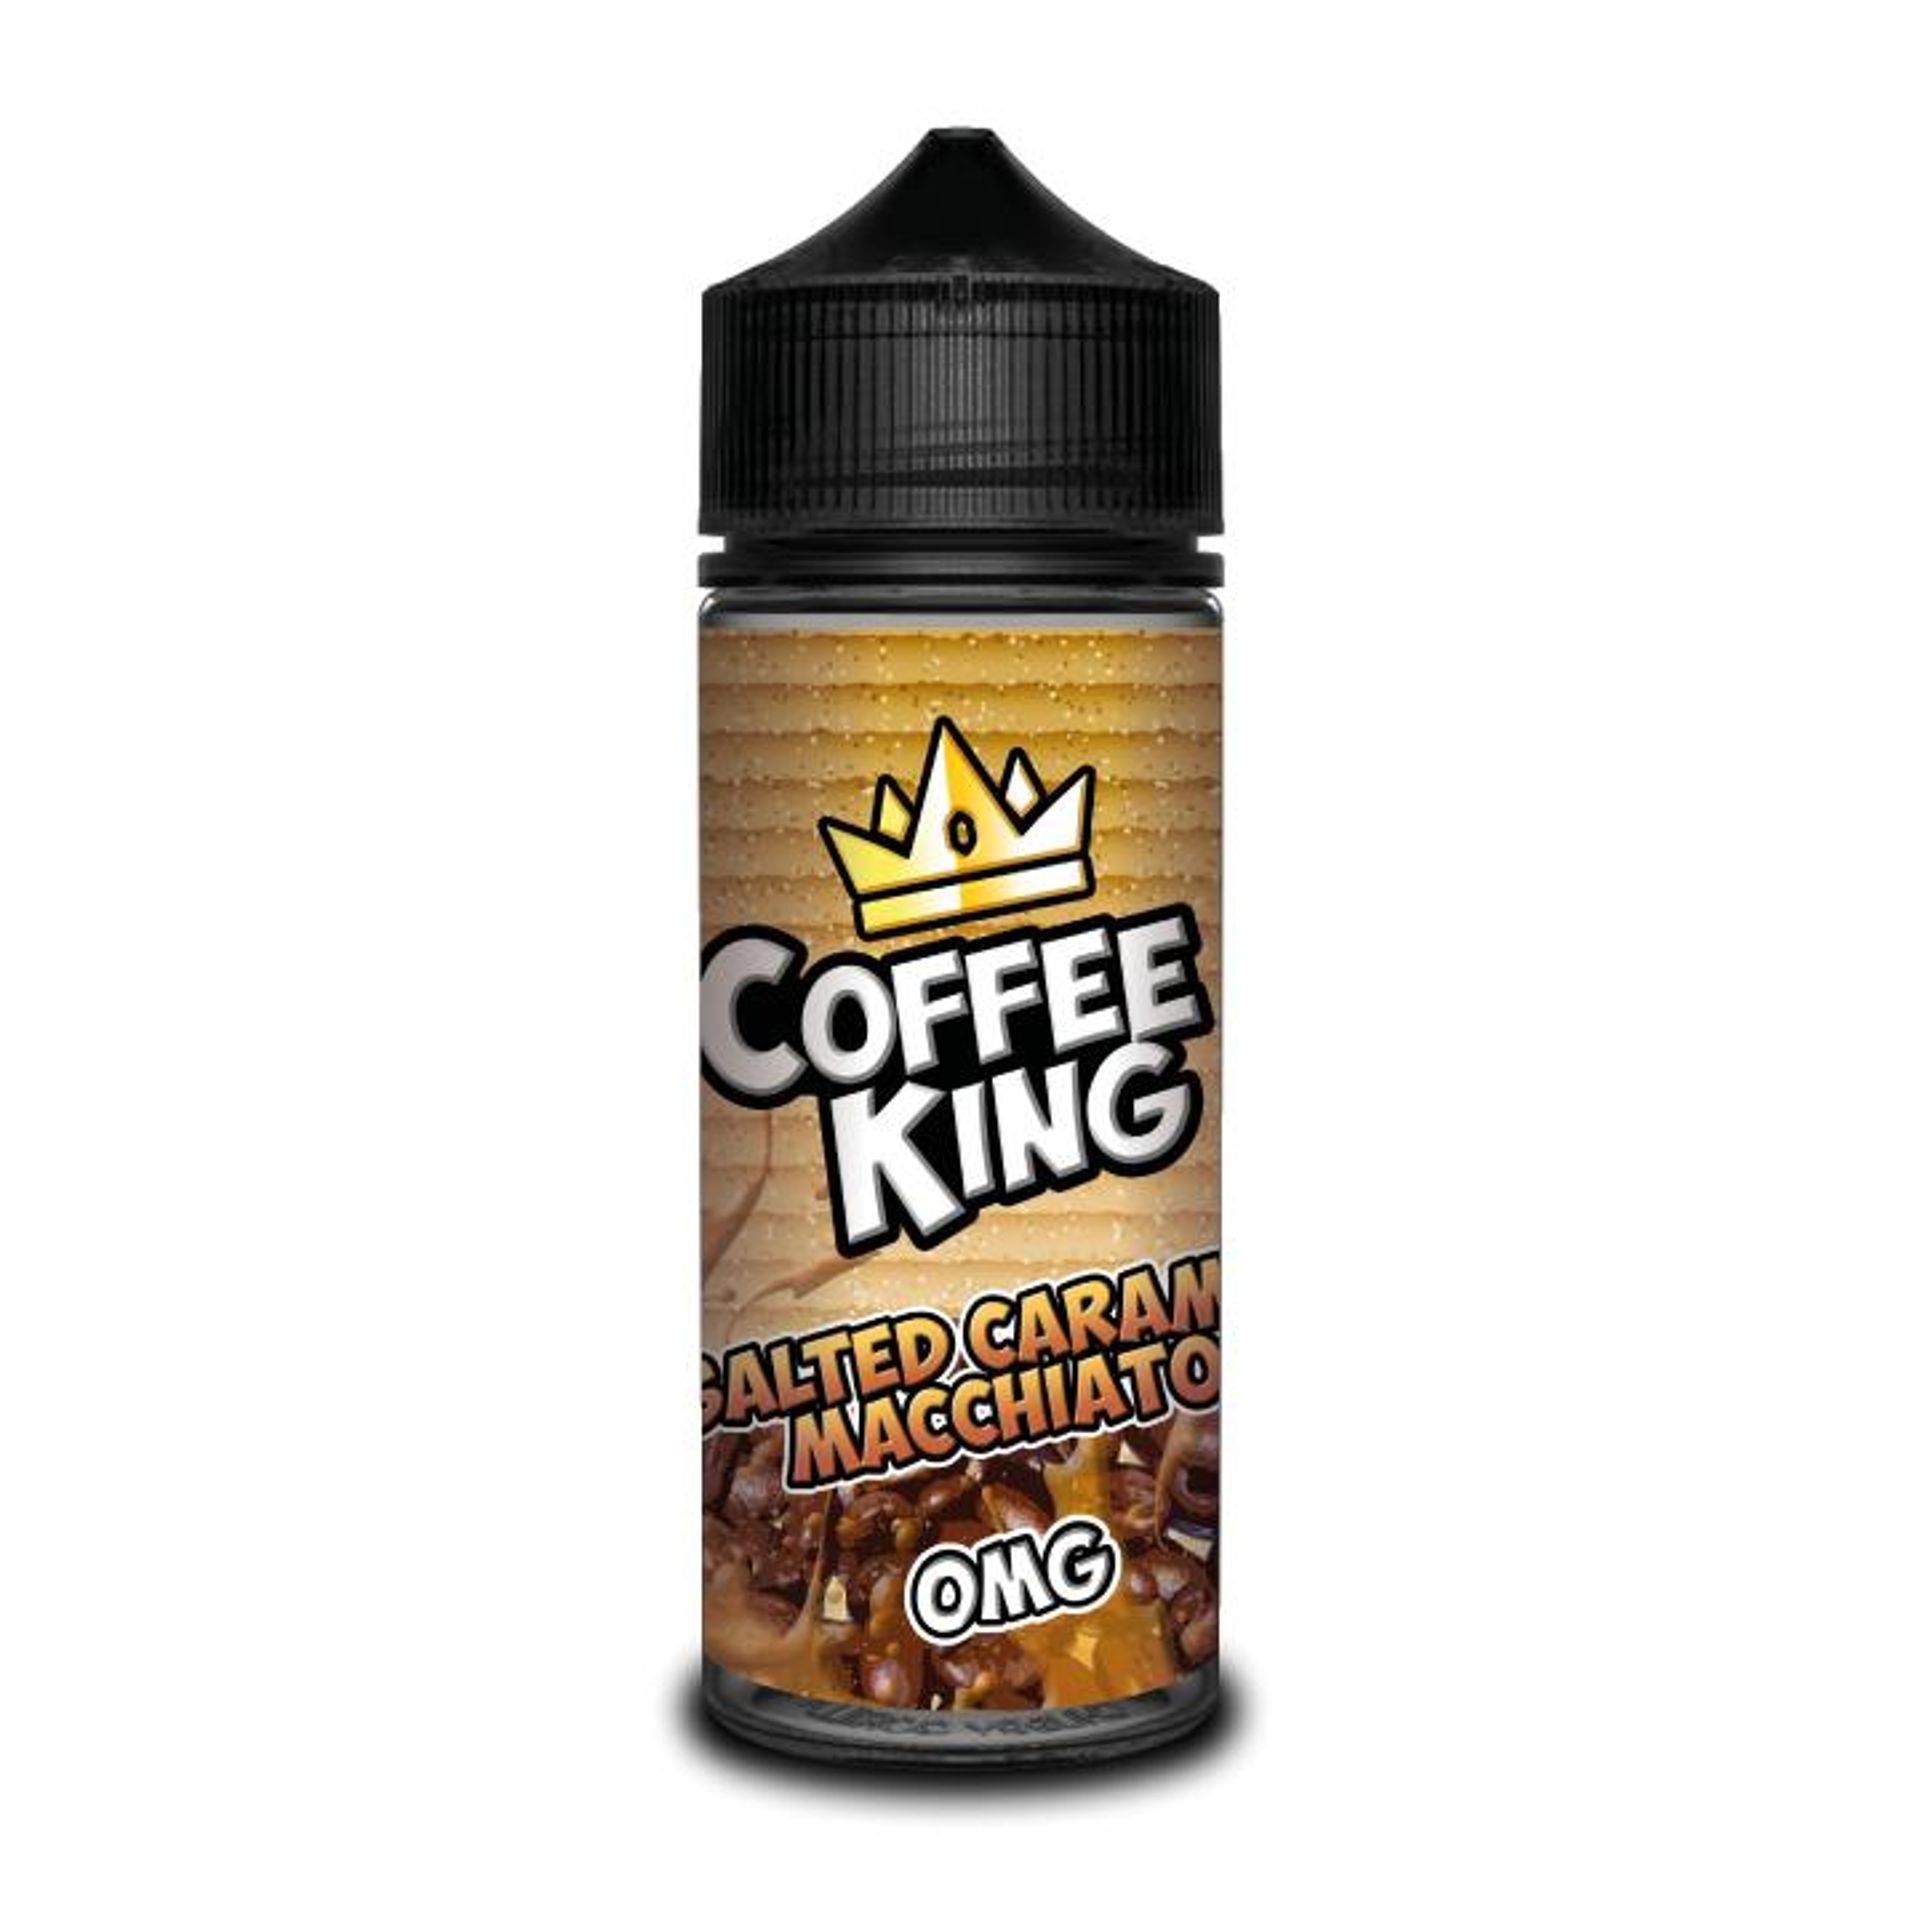 Image of Salted Caramel Macchiato by Coffee King